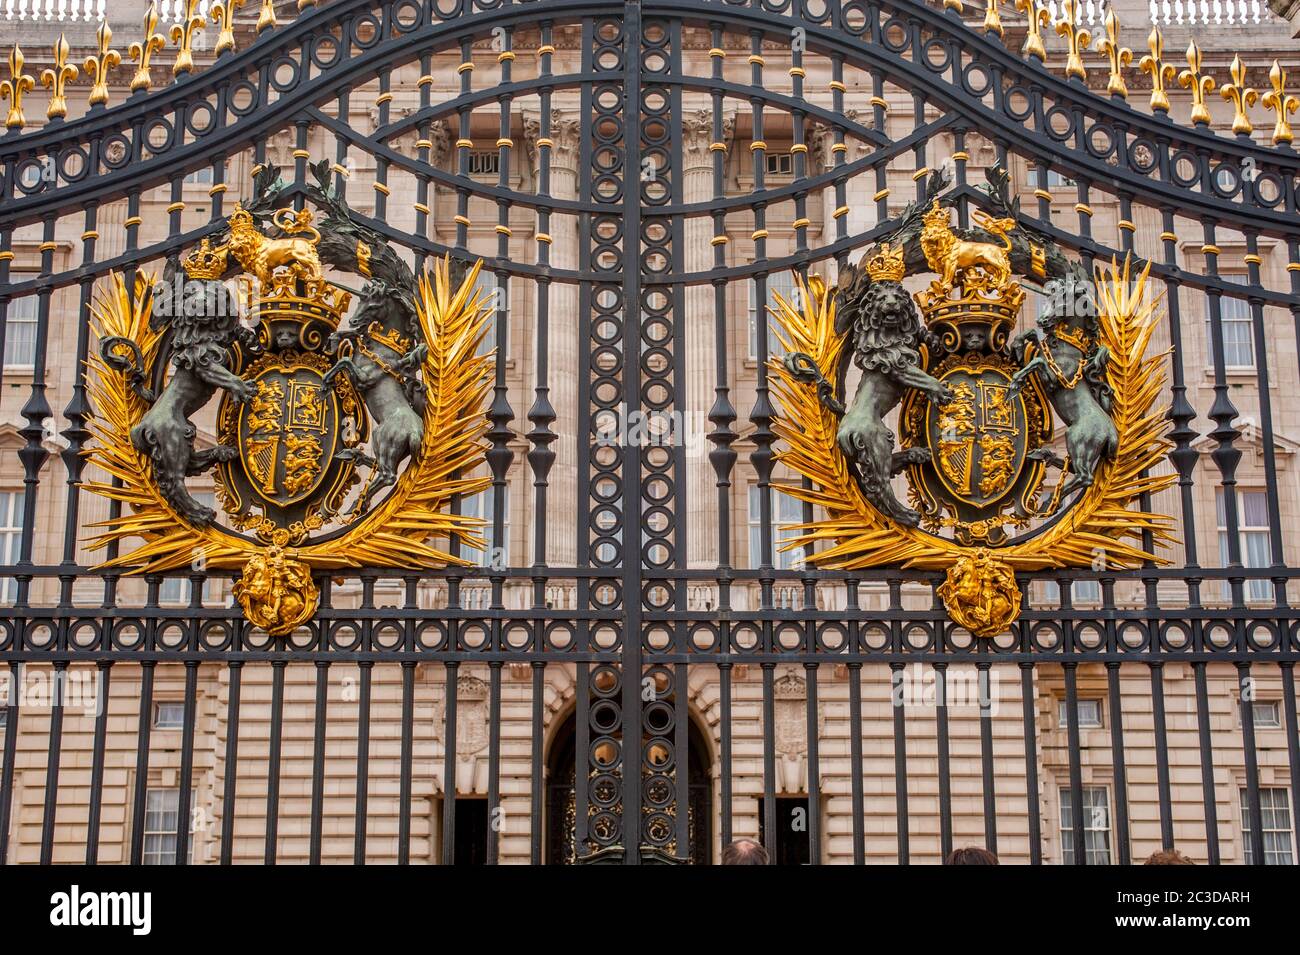 The Royal Coat of Arms on the wrought iron gates of the Buckingham Palace in London, England, Great Britain. Stock Photo